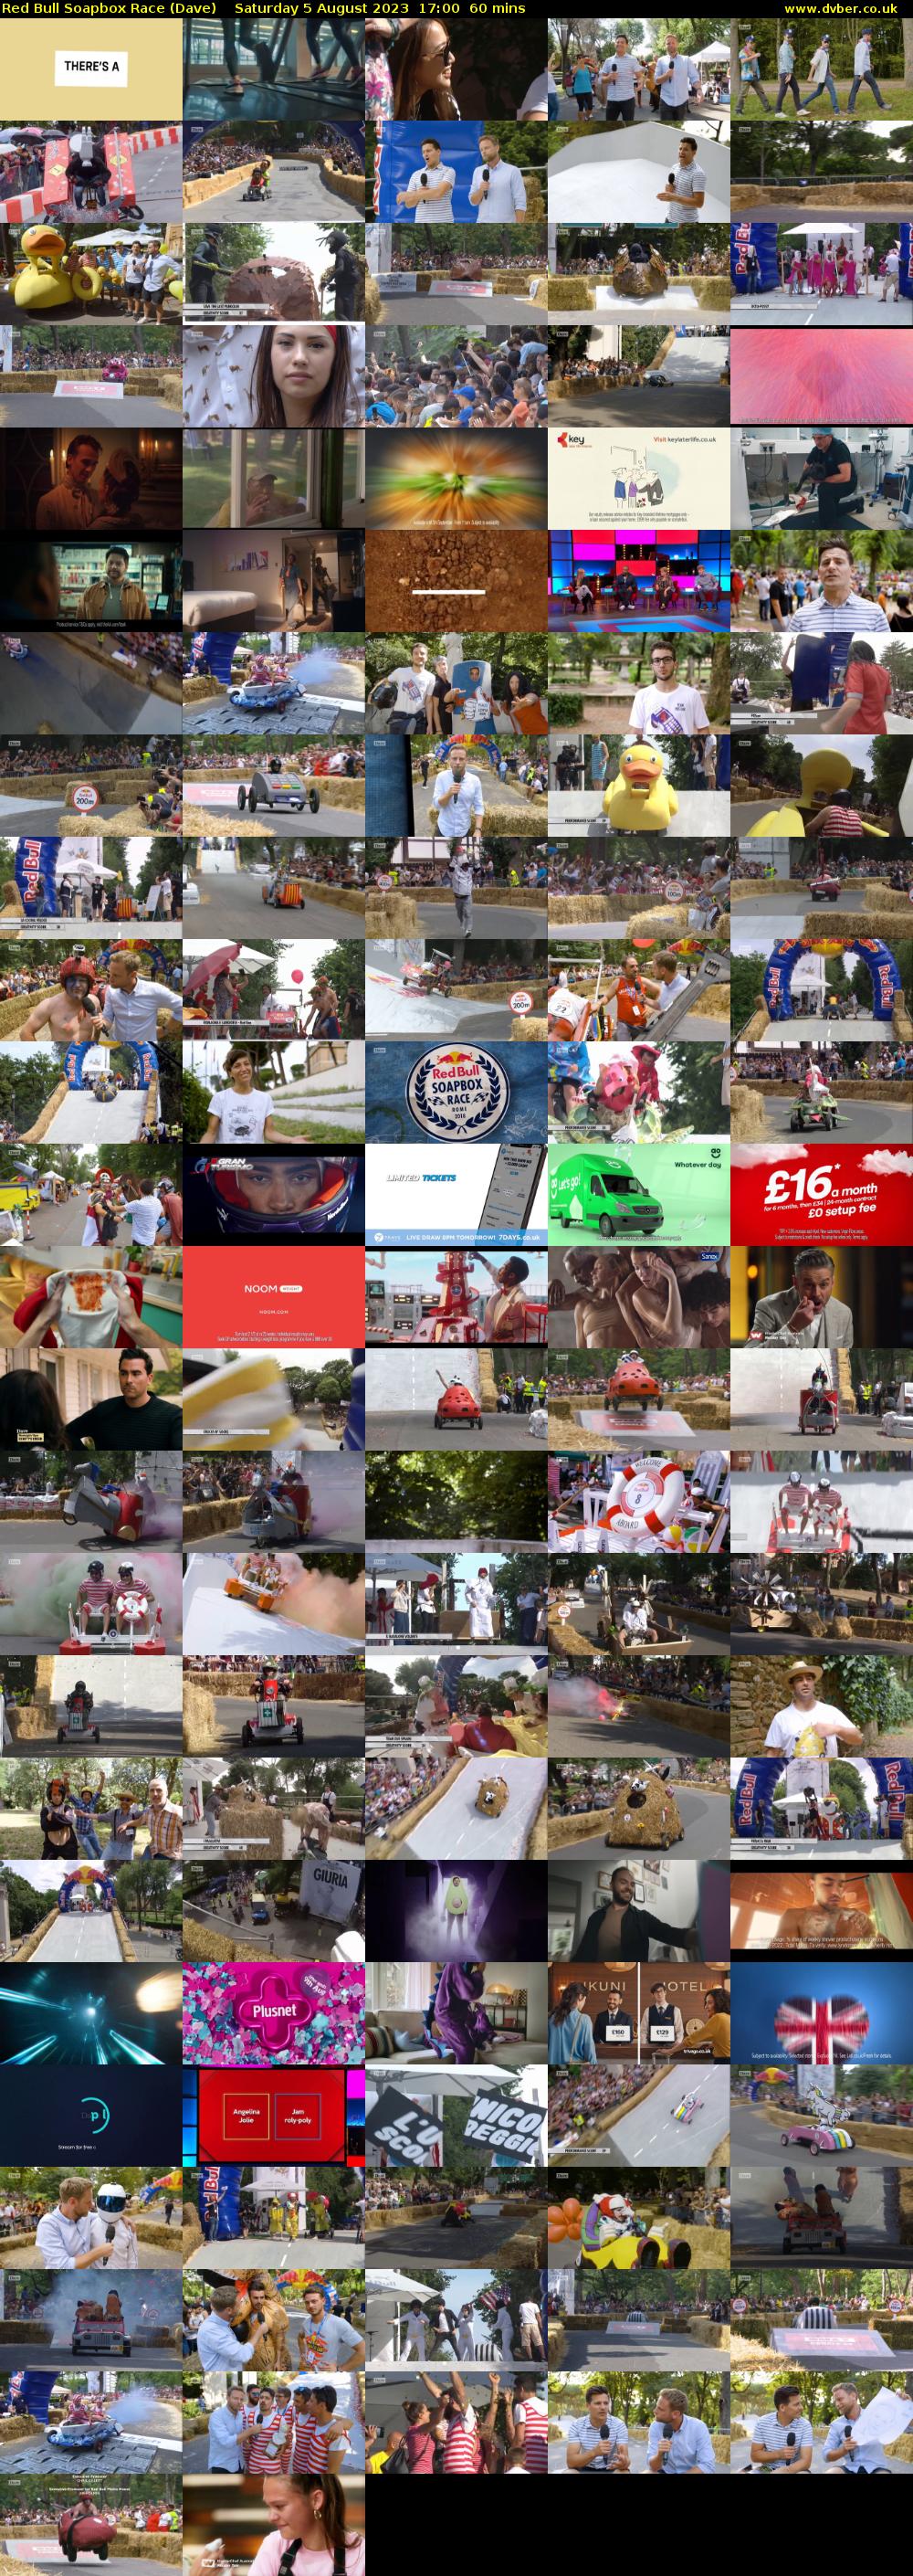 Red Bull Soapbox Race (Dave) Saturday 5 August 2023 17:00 - 18:00